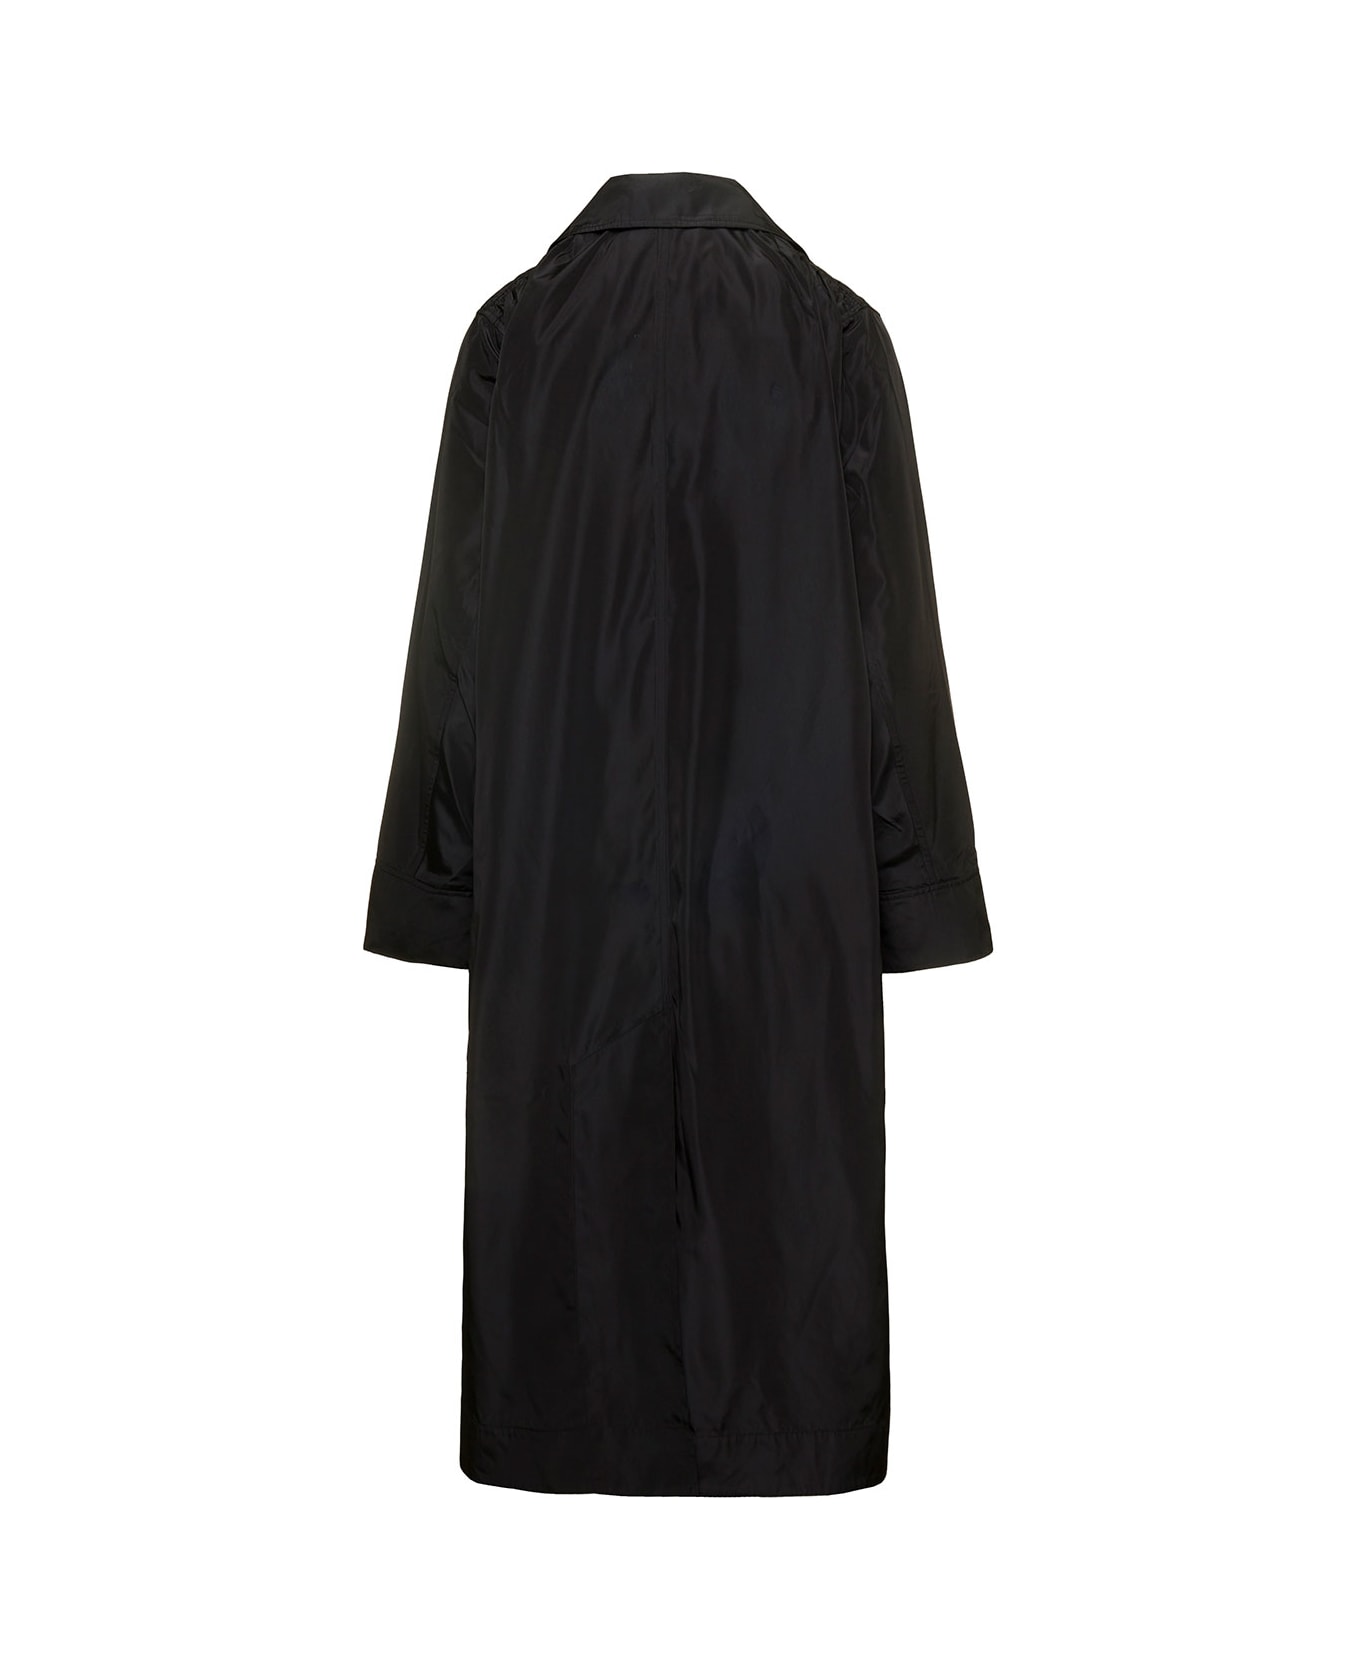 Ganni 'summer' Long Black Single-breasted Trench Coat With Buttons And Patch Pockets In Recycled Tech Fabric Woman - Black